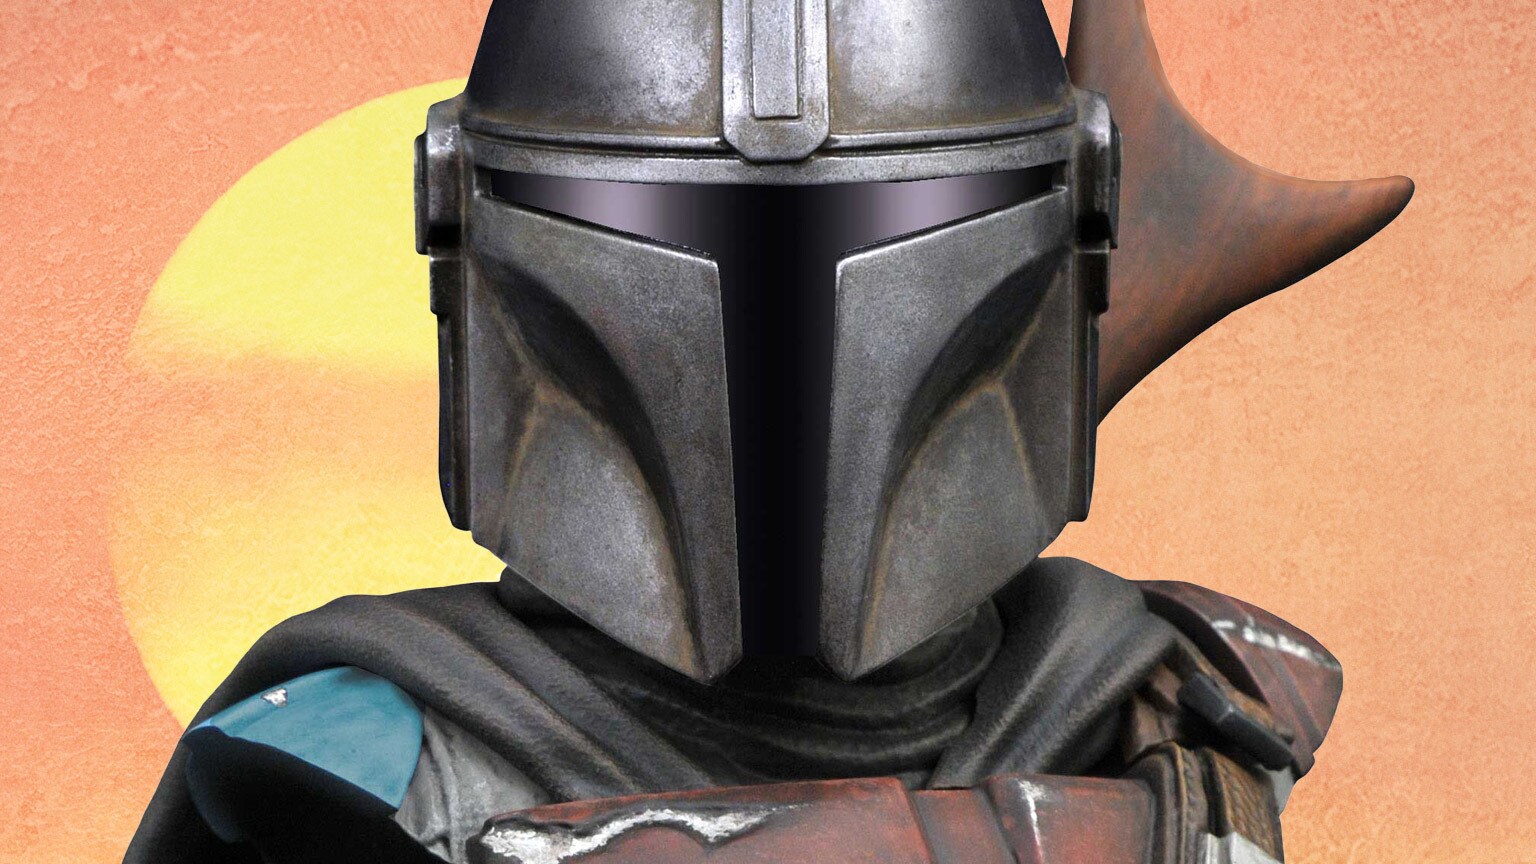 The Mandalorian and Kylo Ren Become 'Legends in 3D' Thanks to Gentle Giant Ltd.